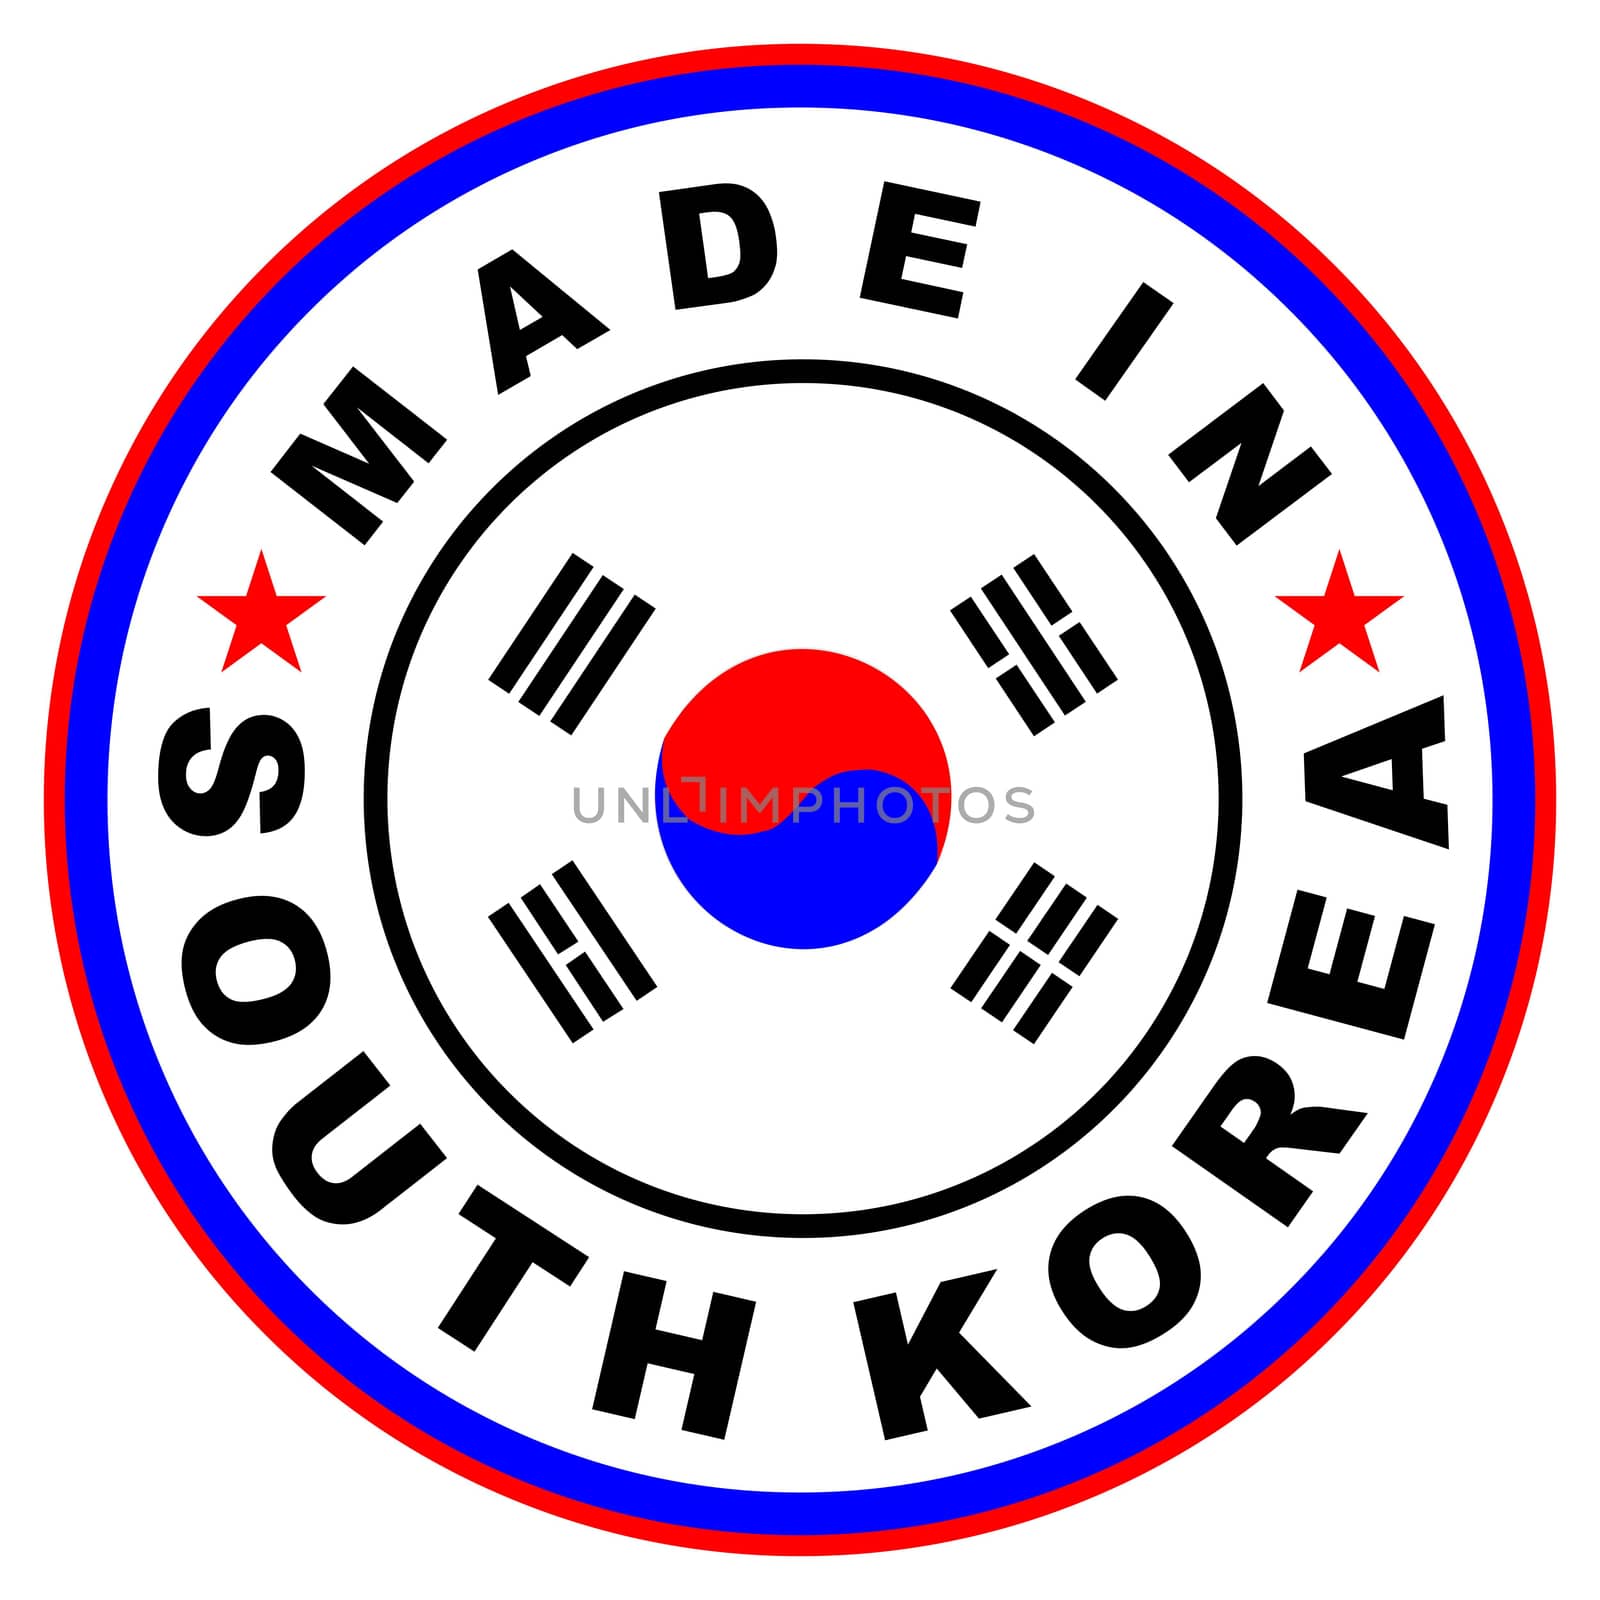 very big size made in south korea label illustratioan